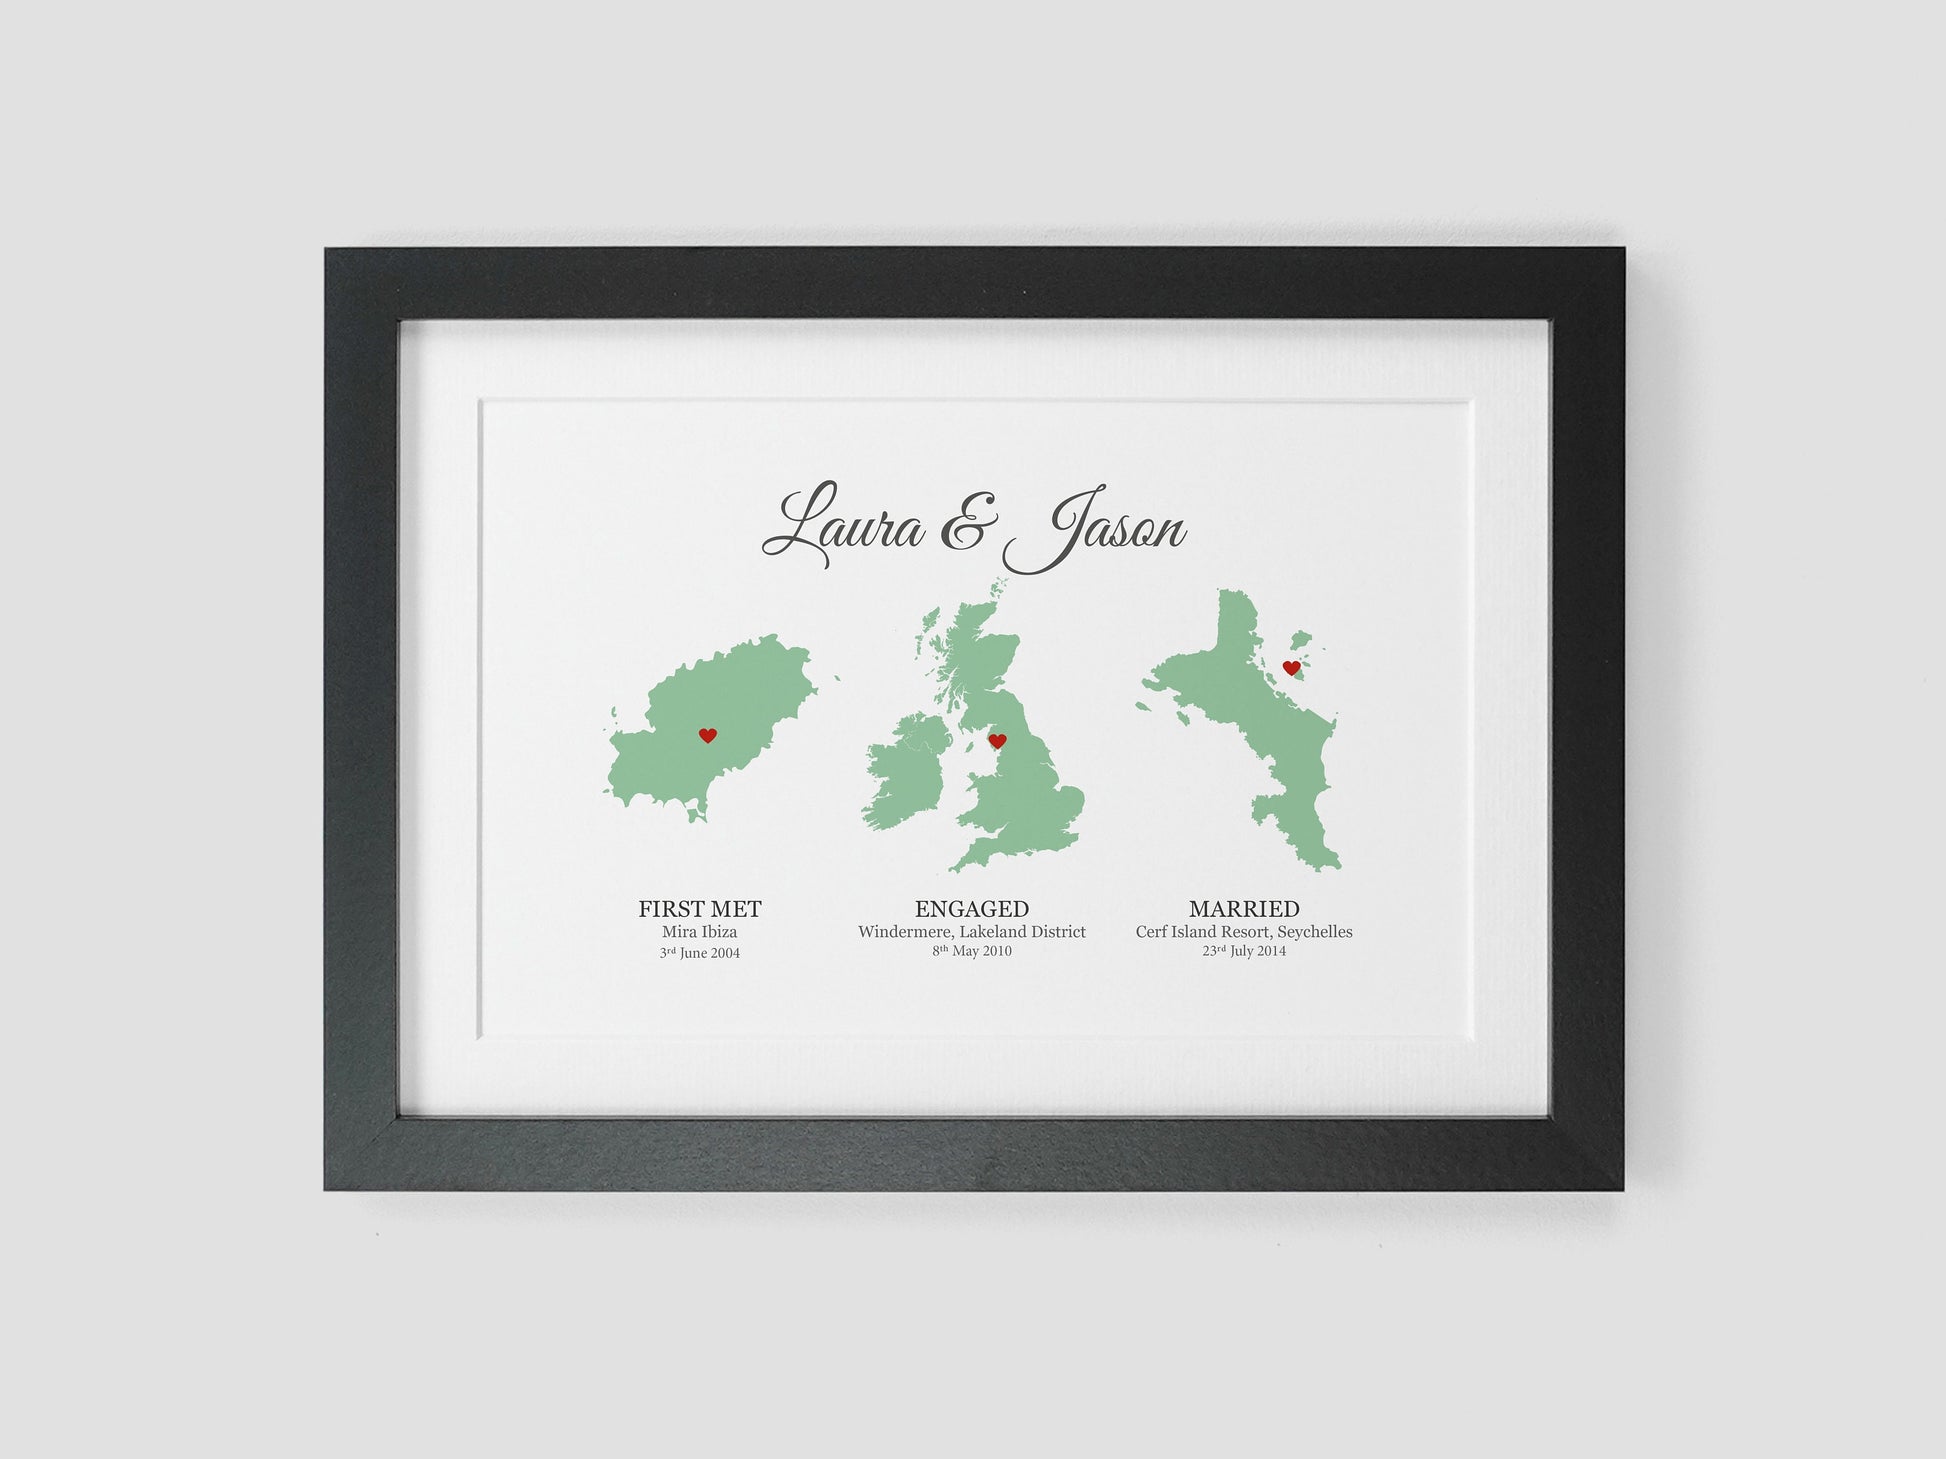 Personalised anniversary gift | Custom wedding gift | Met engaged married maps | Gift for couple, wife, husband | Paper anniversary VA031